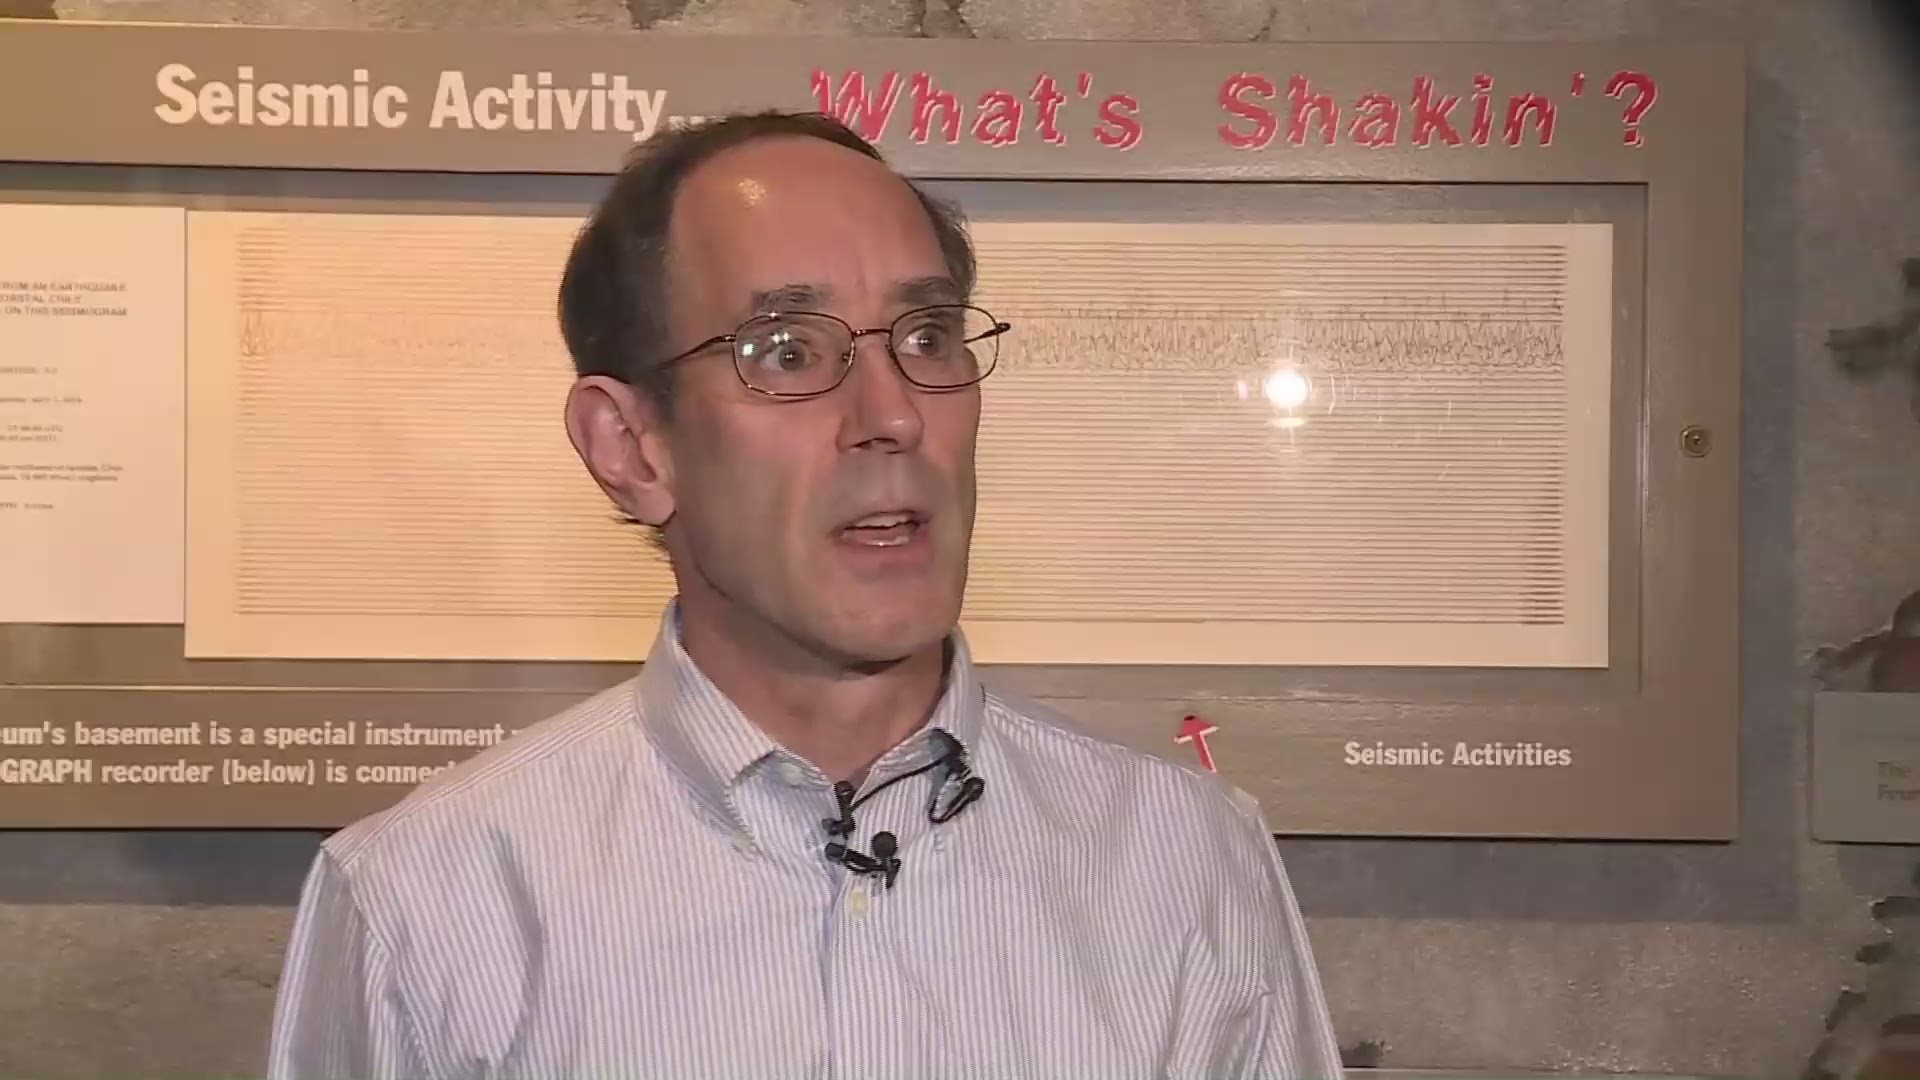 Cleveland Museum of Natural History curator of minerology Dr. David Saja discusses what happened during Monday's Eastlake earthquake. The 4.0 quake was felt across much of Northeast Ohio.